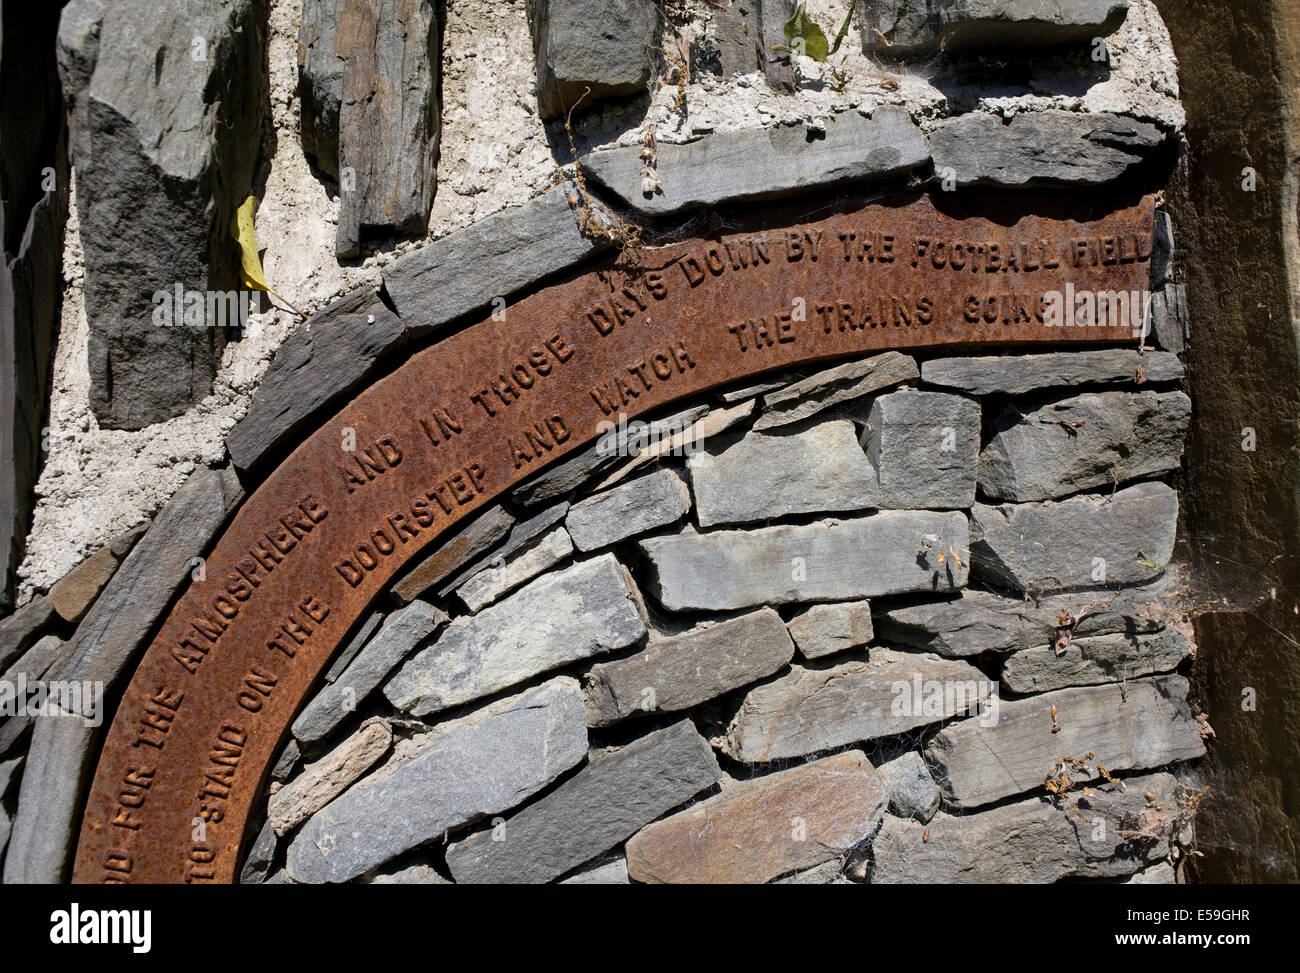 Inscription on wall by path running through Garw valley Stock Photo